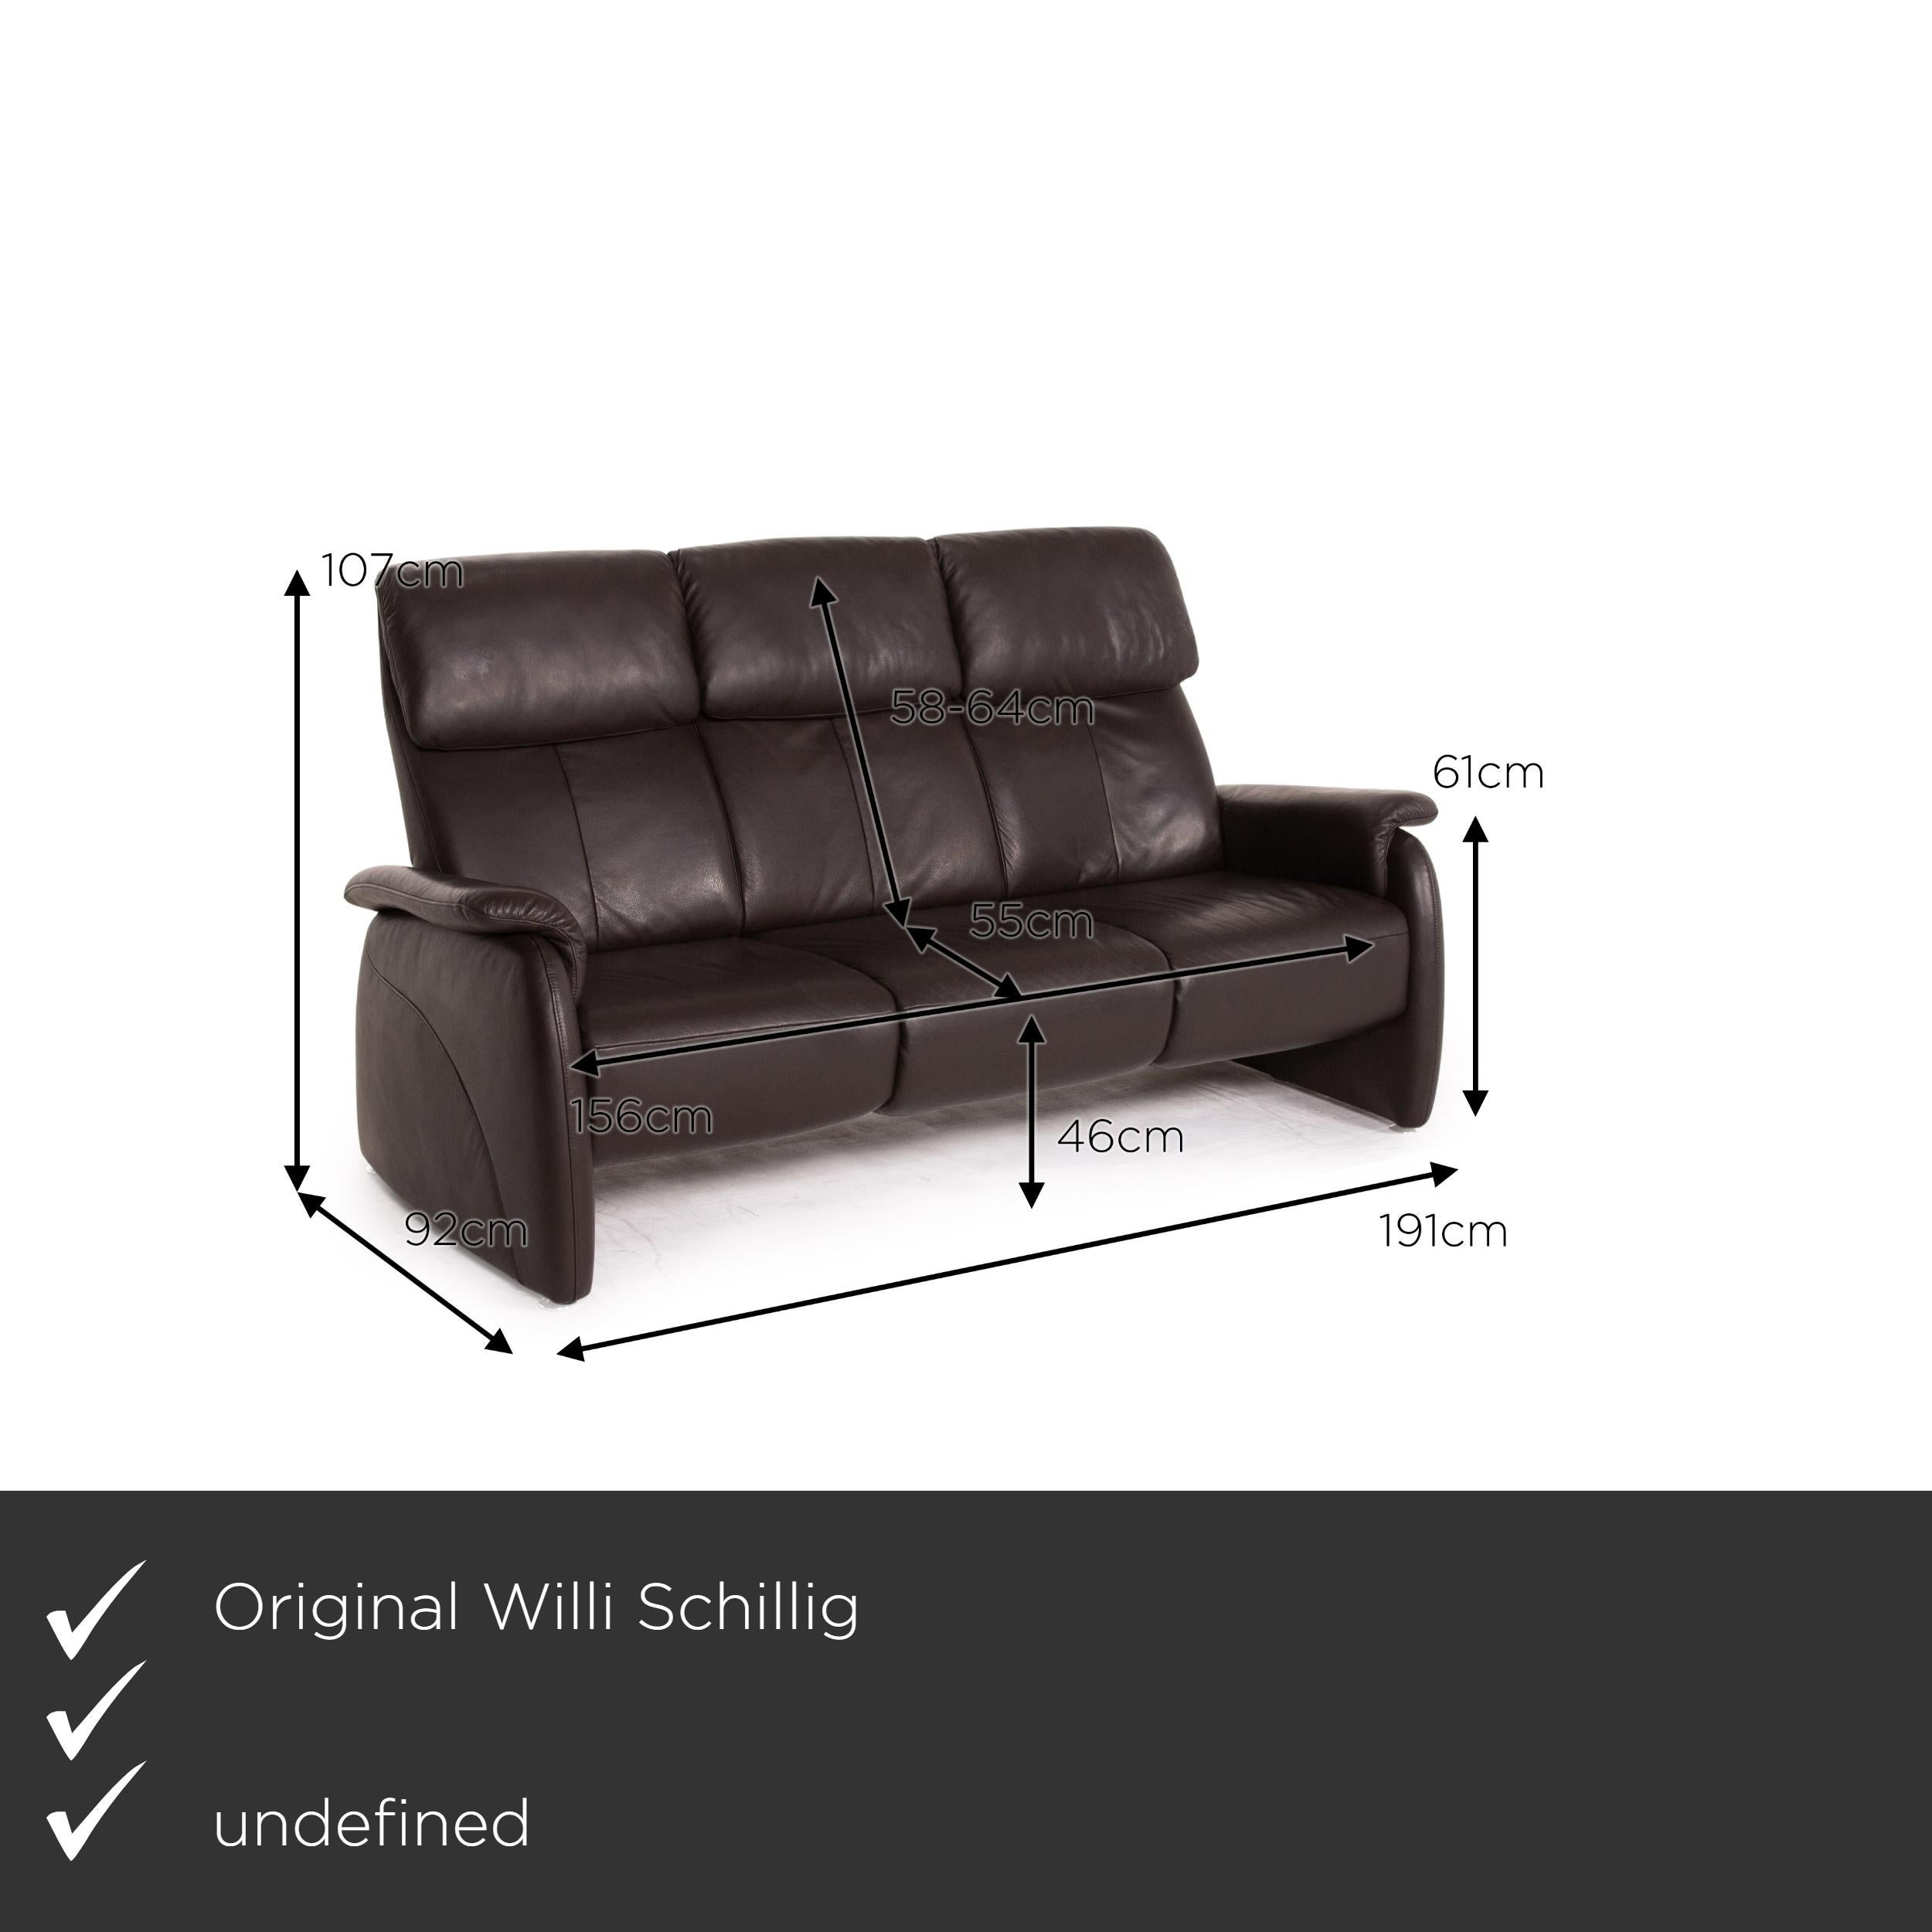 We present to you a Willi Schillig leather sofa set brown dark brown 1x three-seater 1x two-seater.

Product measurements in centimeters:

Depth 92
Width 191
Height 107
Seat height 46
Rest height 61
Seat depth 55
Seat width 156
Back